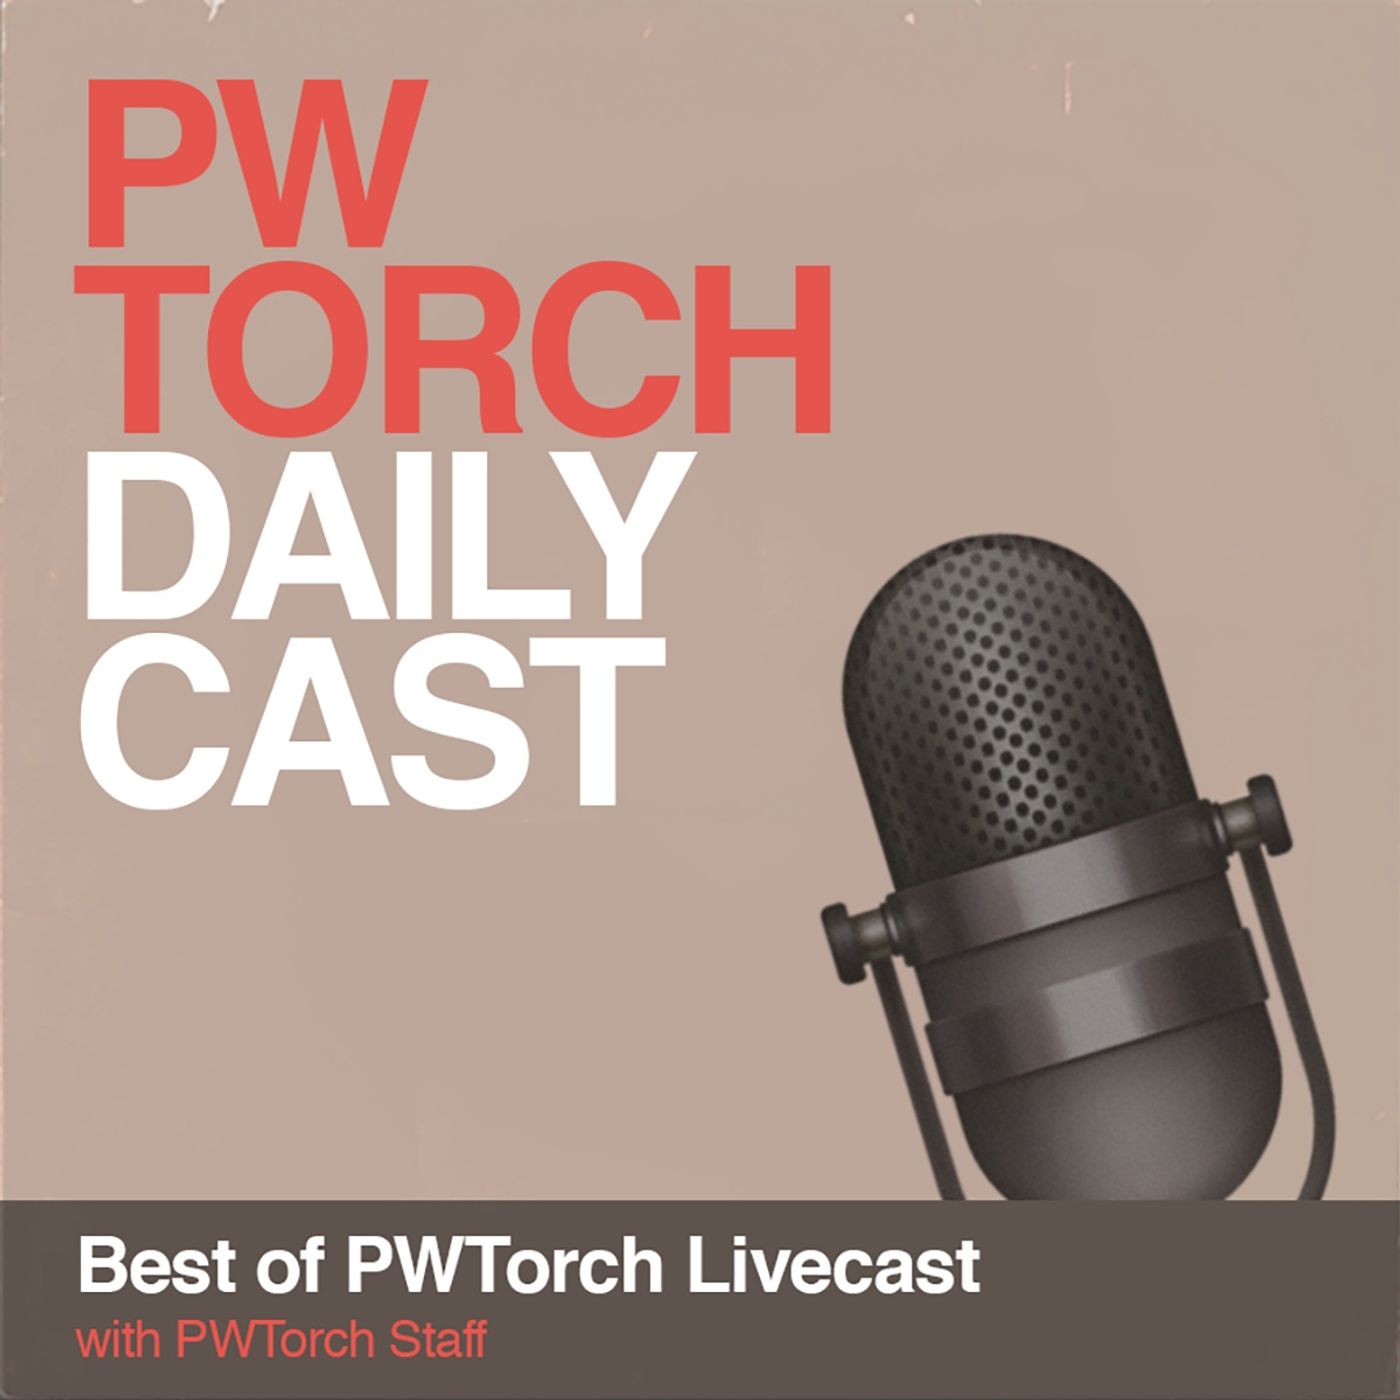 Best of PWTorch Livecast - (5-4-2014) WWE Extreme Rules post-show including Bryan's first WWE Title defense, Cena vs. Bray, more